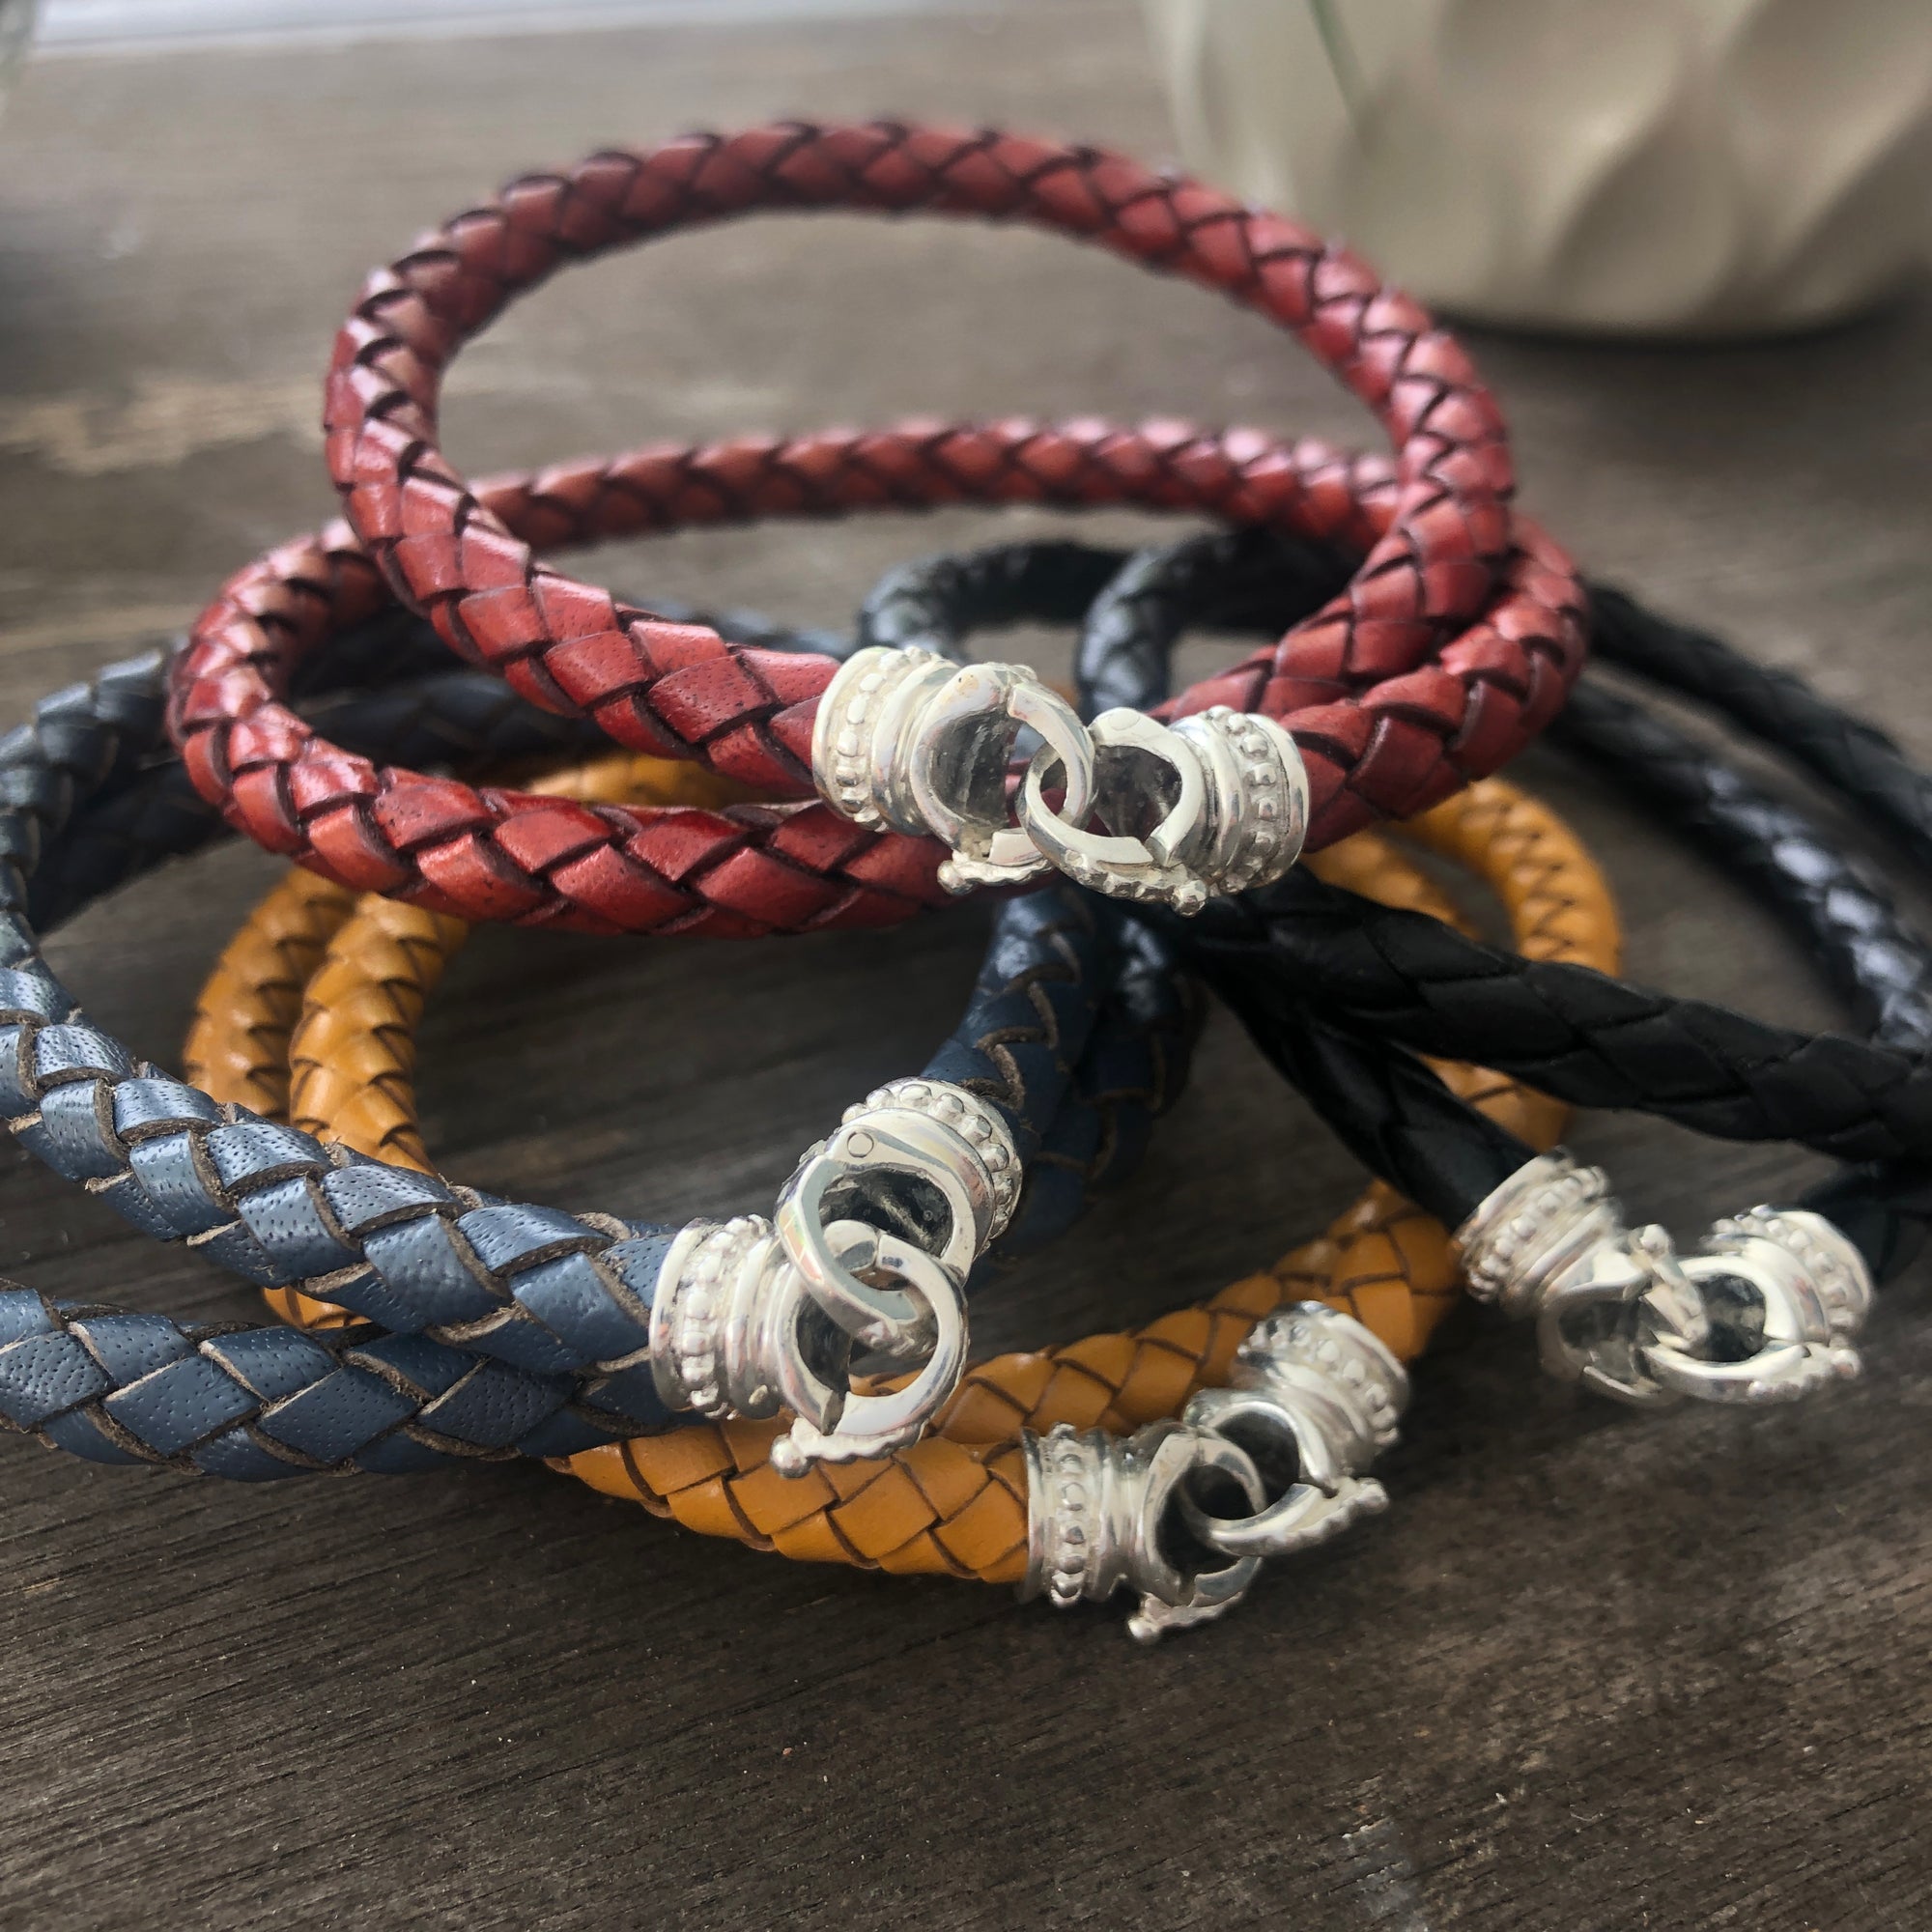 Leather Necklace Chord with Connections